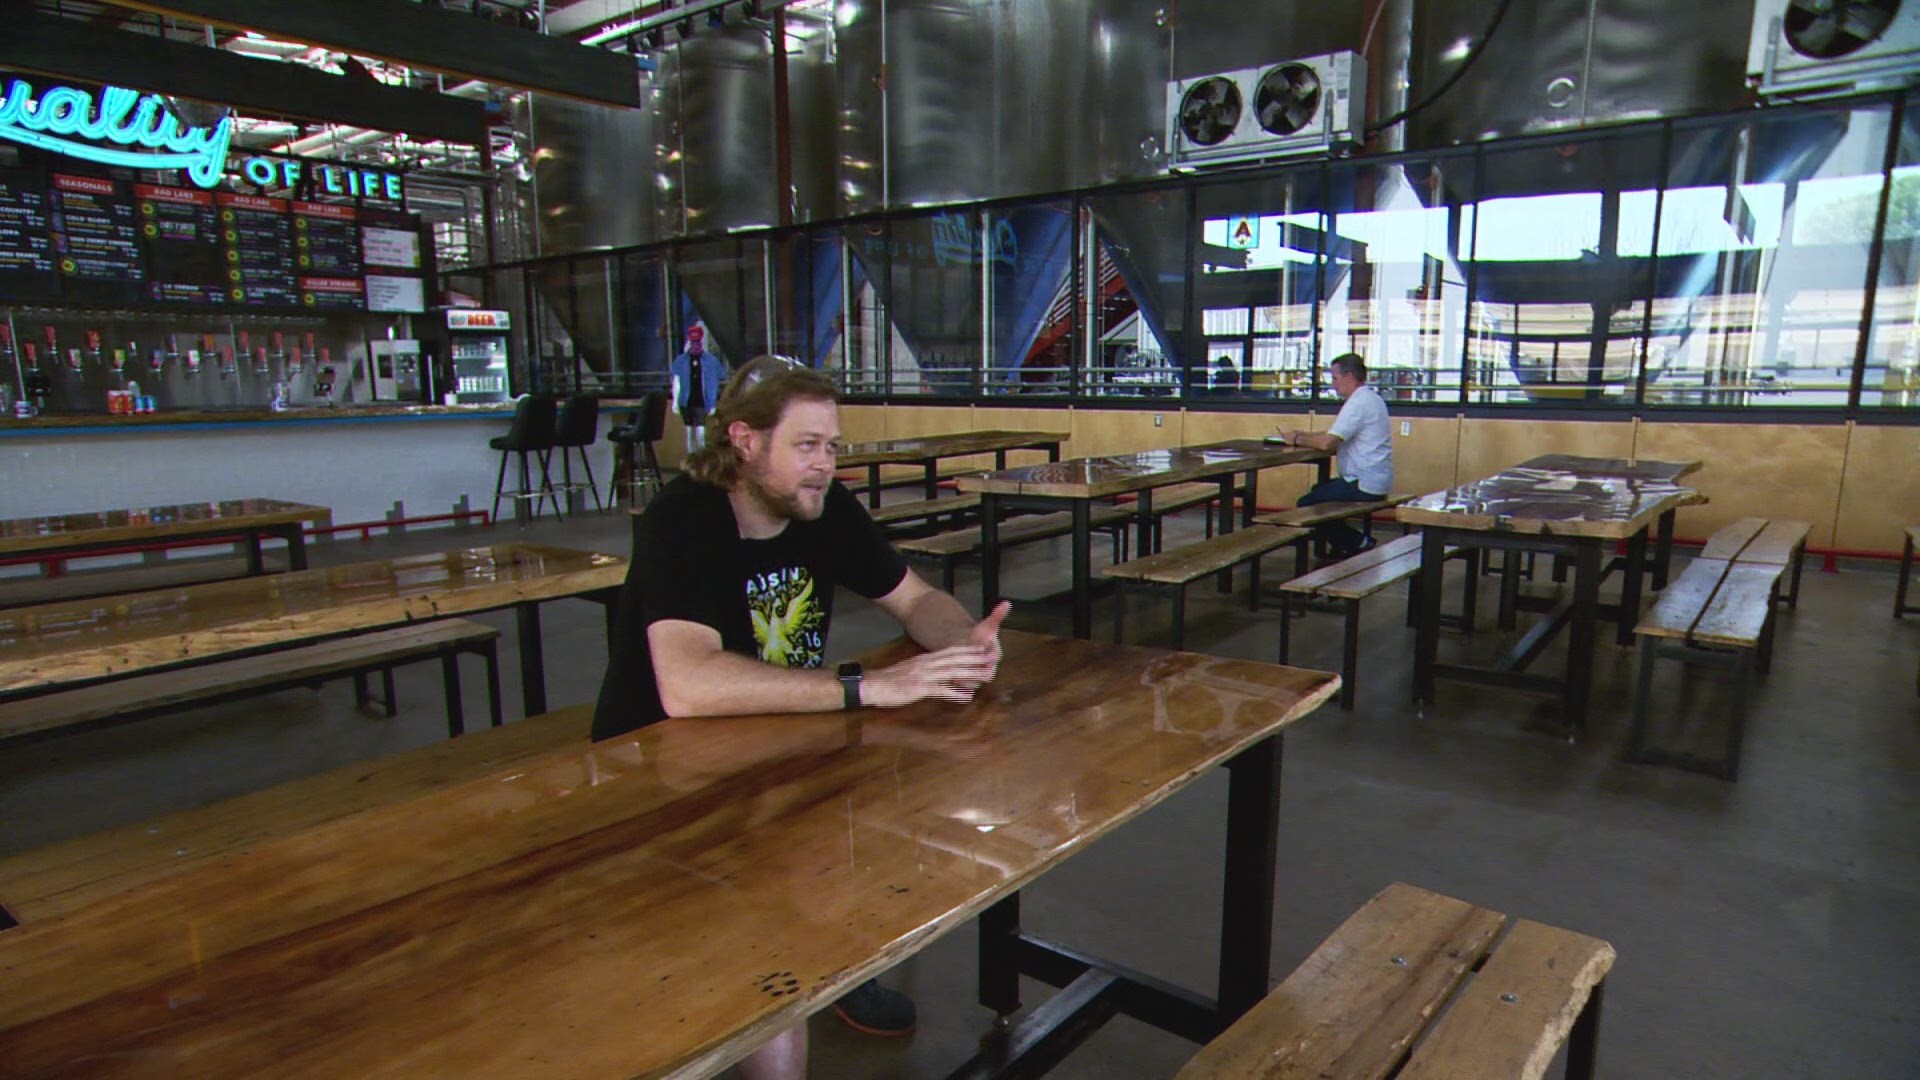 Chance Patrick, head brewer at Austin Beerworks, explains how a few simple ingredients are combined to make beer.